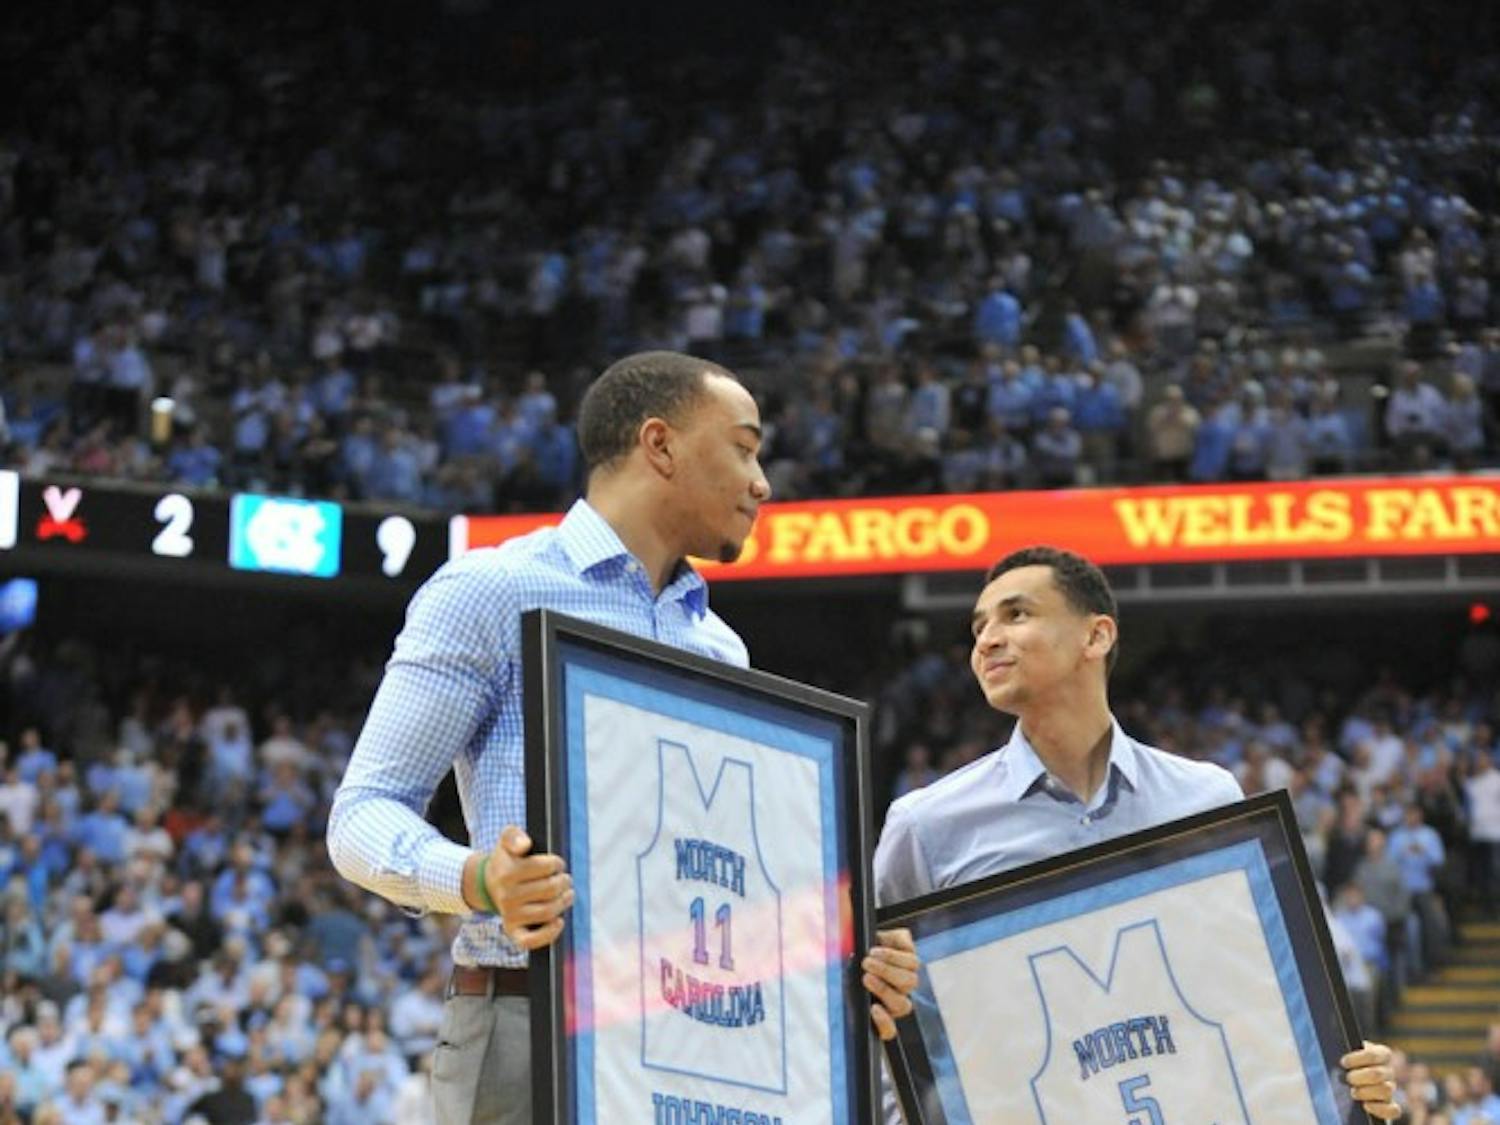 The North Carolina men's basketball team defeated Virginia 65-41 in Chapel Hill Saturday night. Former teammates Brice Johnson and Marcus Paige were honored at halftime.